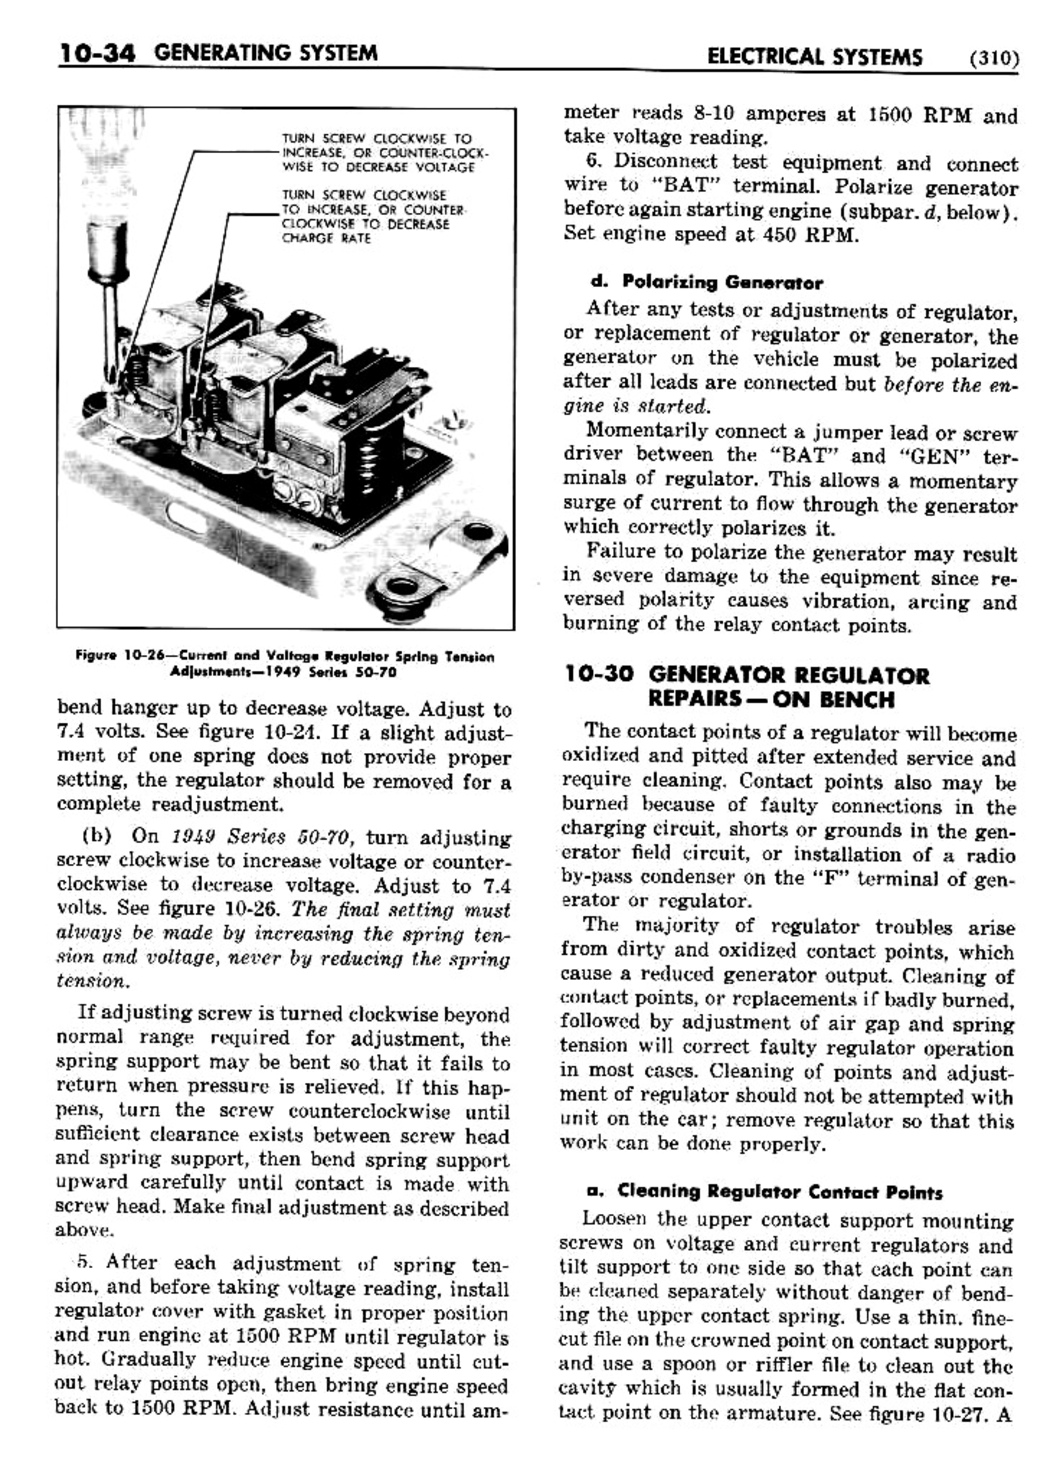 n_11 1948 Buick Shop Manual - Electrical Systems-034-034.jpg